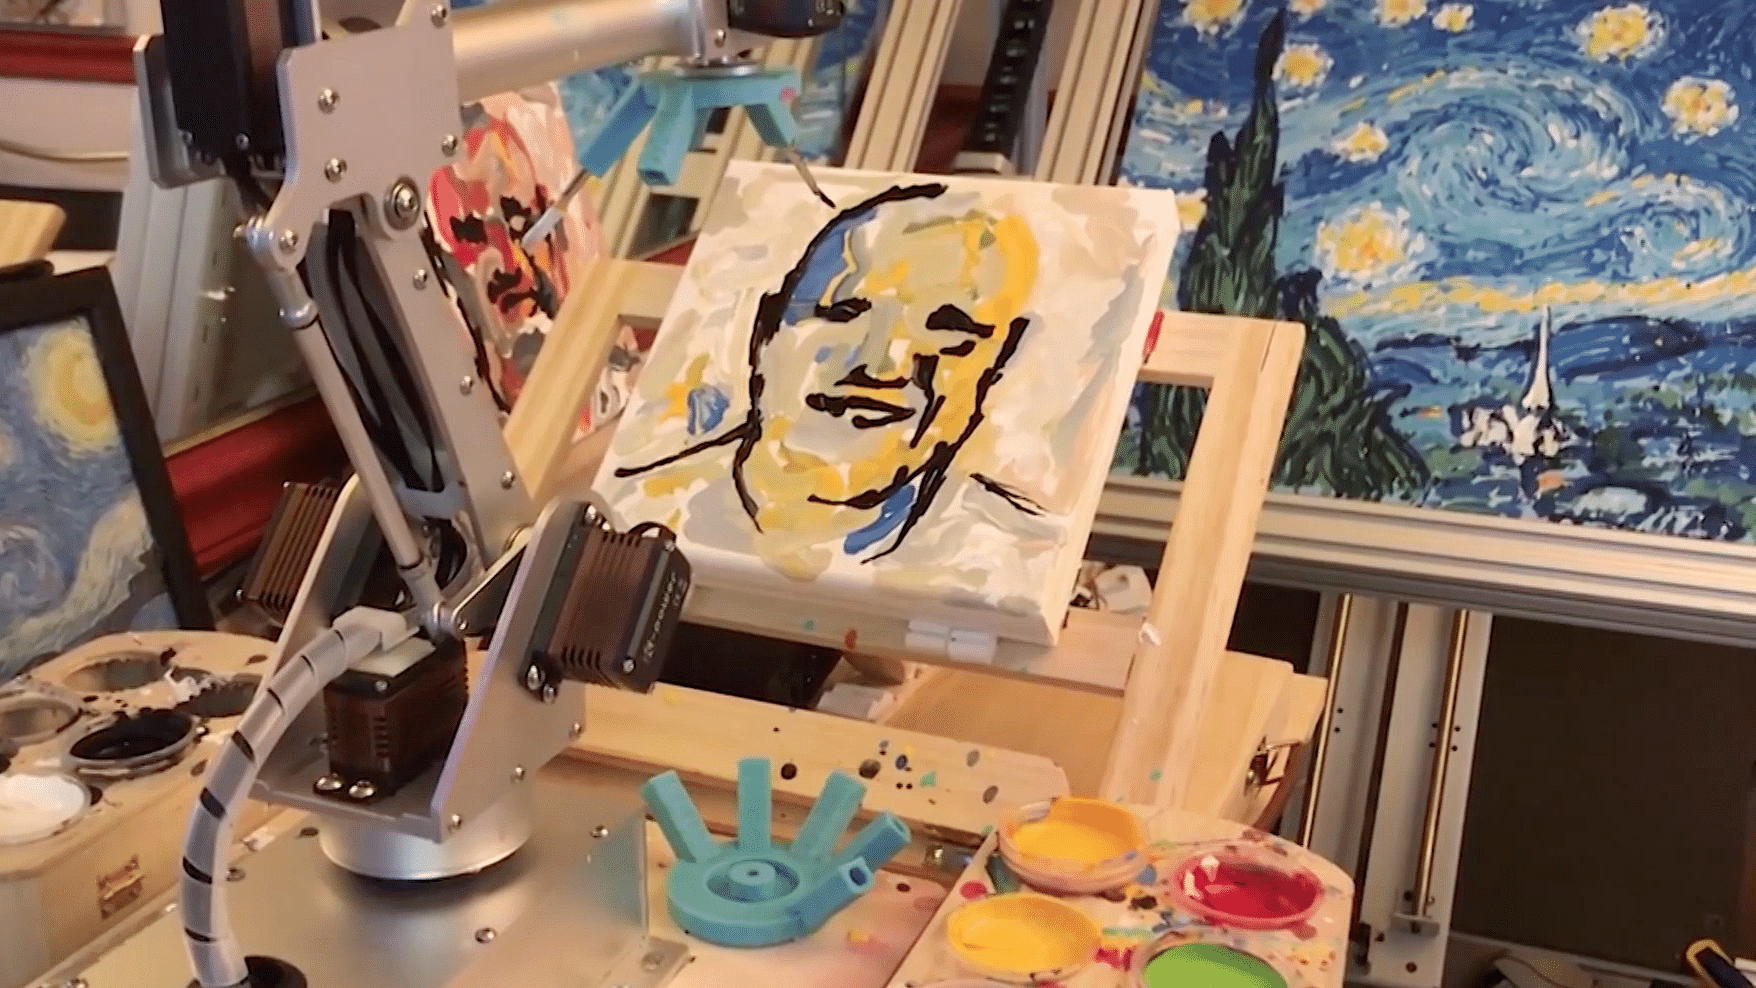 The world’s best robot artist aka CloudPainter, is not only painting masterpieces, but also imagining them, itself!